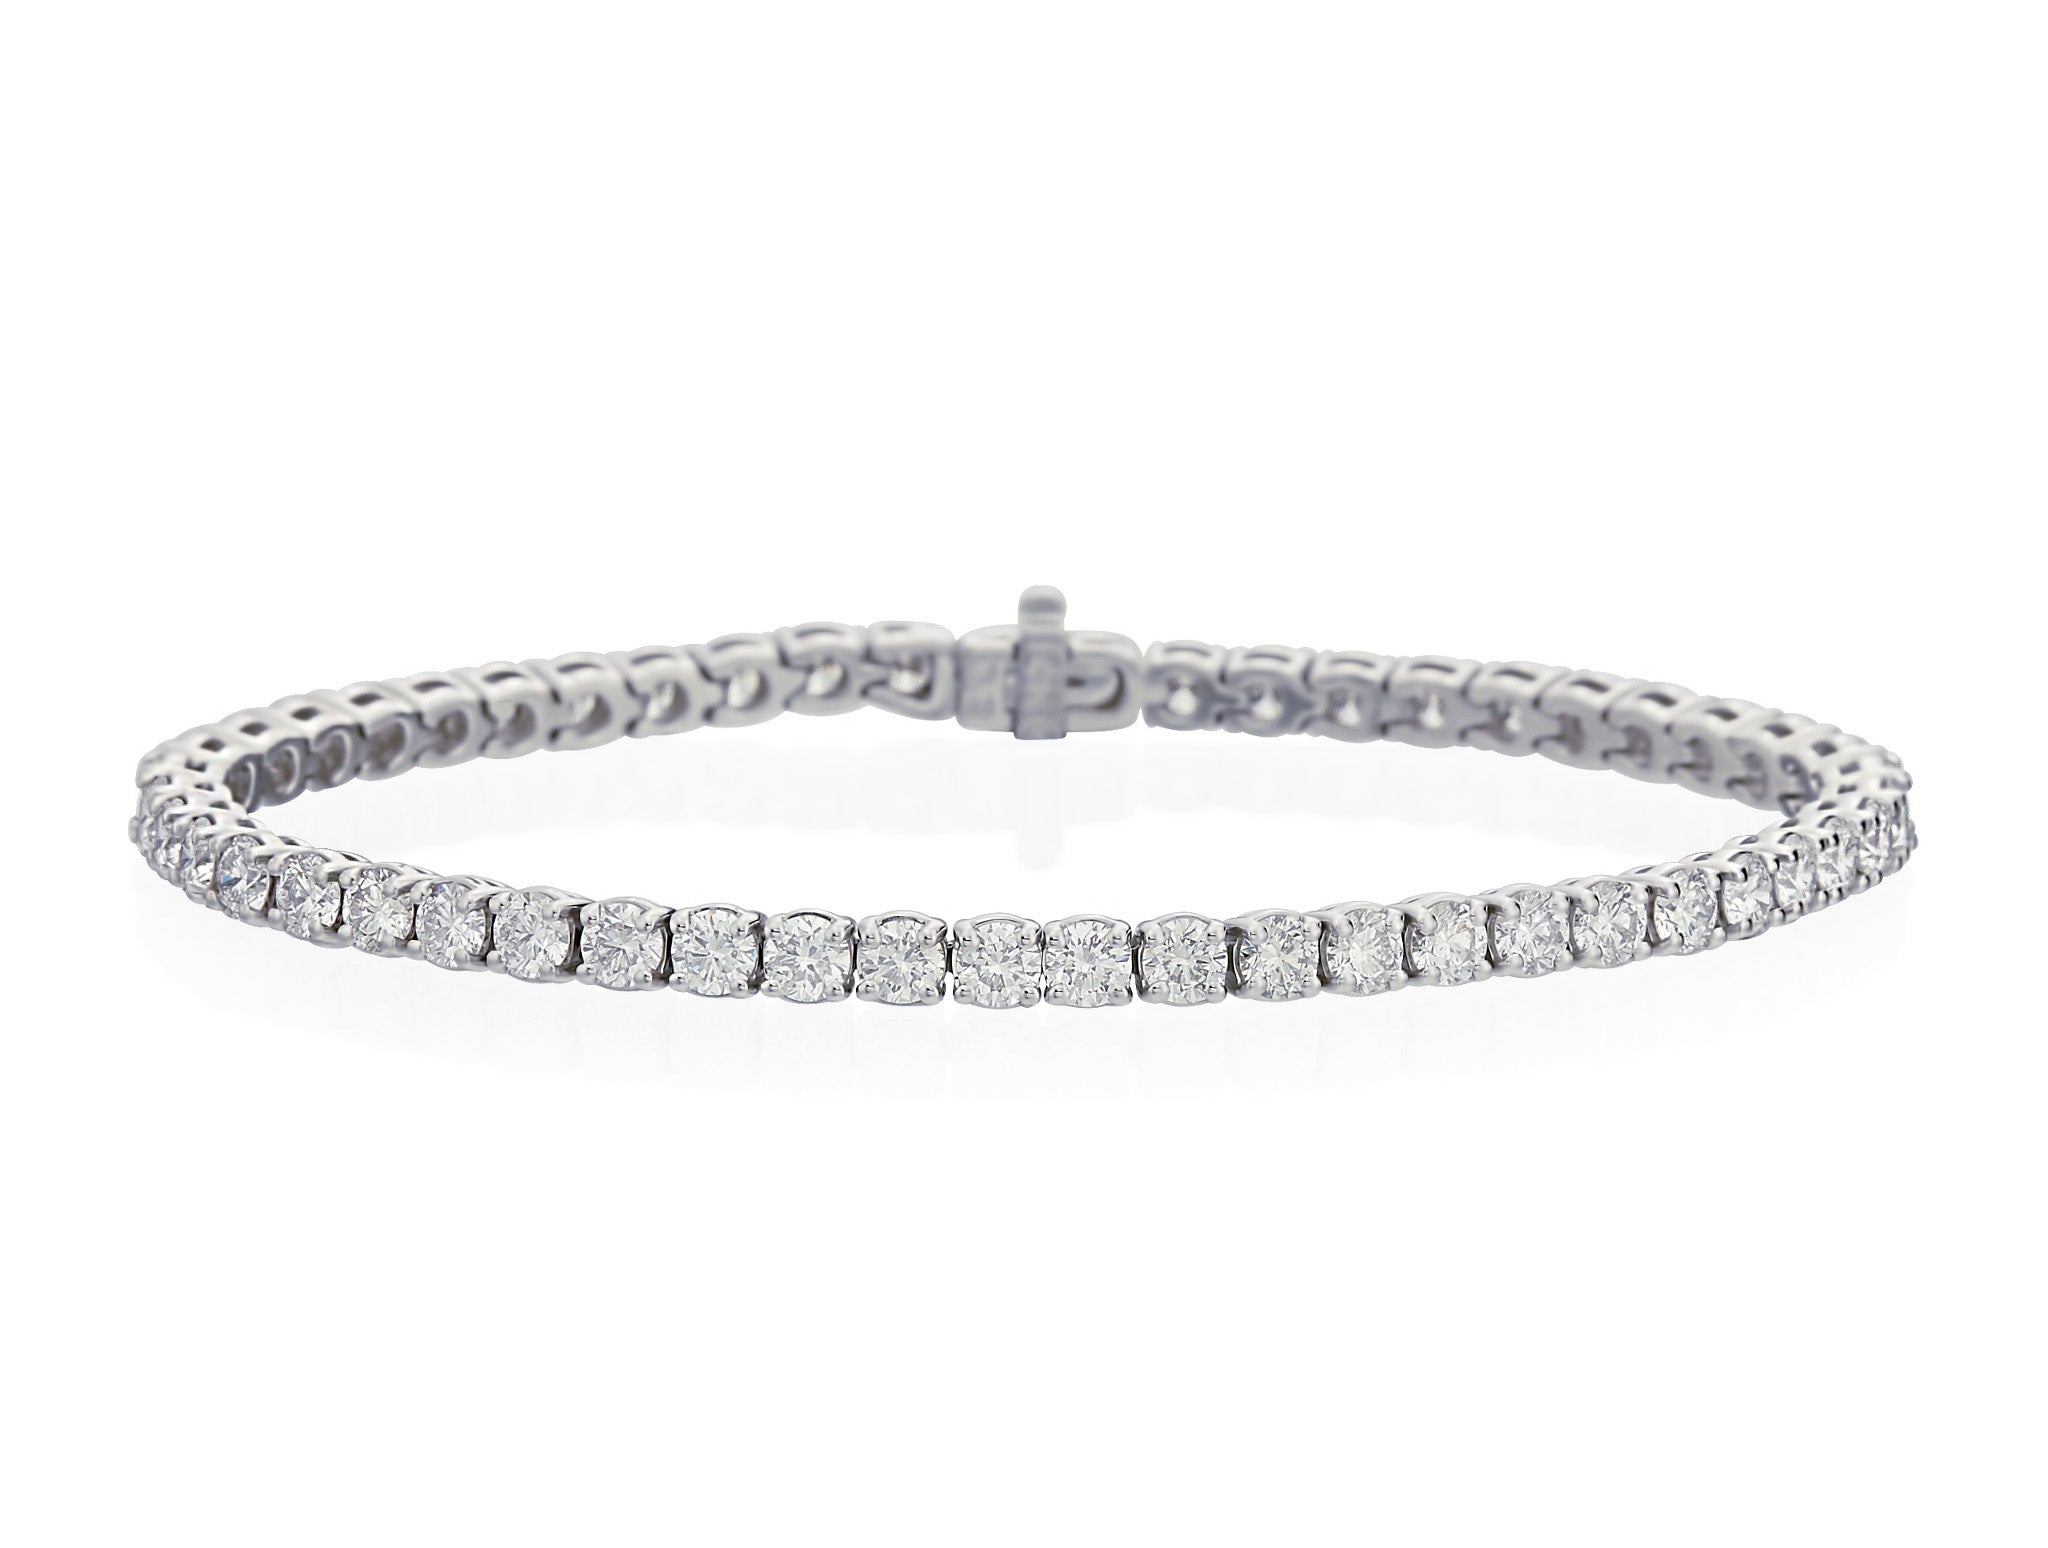 Diamond Tennis Bracelet Available in Varying Sizes and Metals